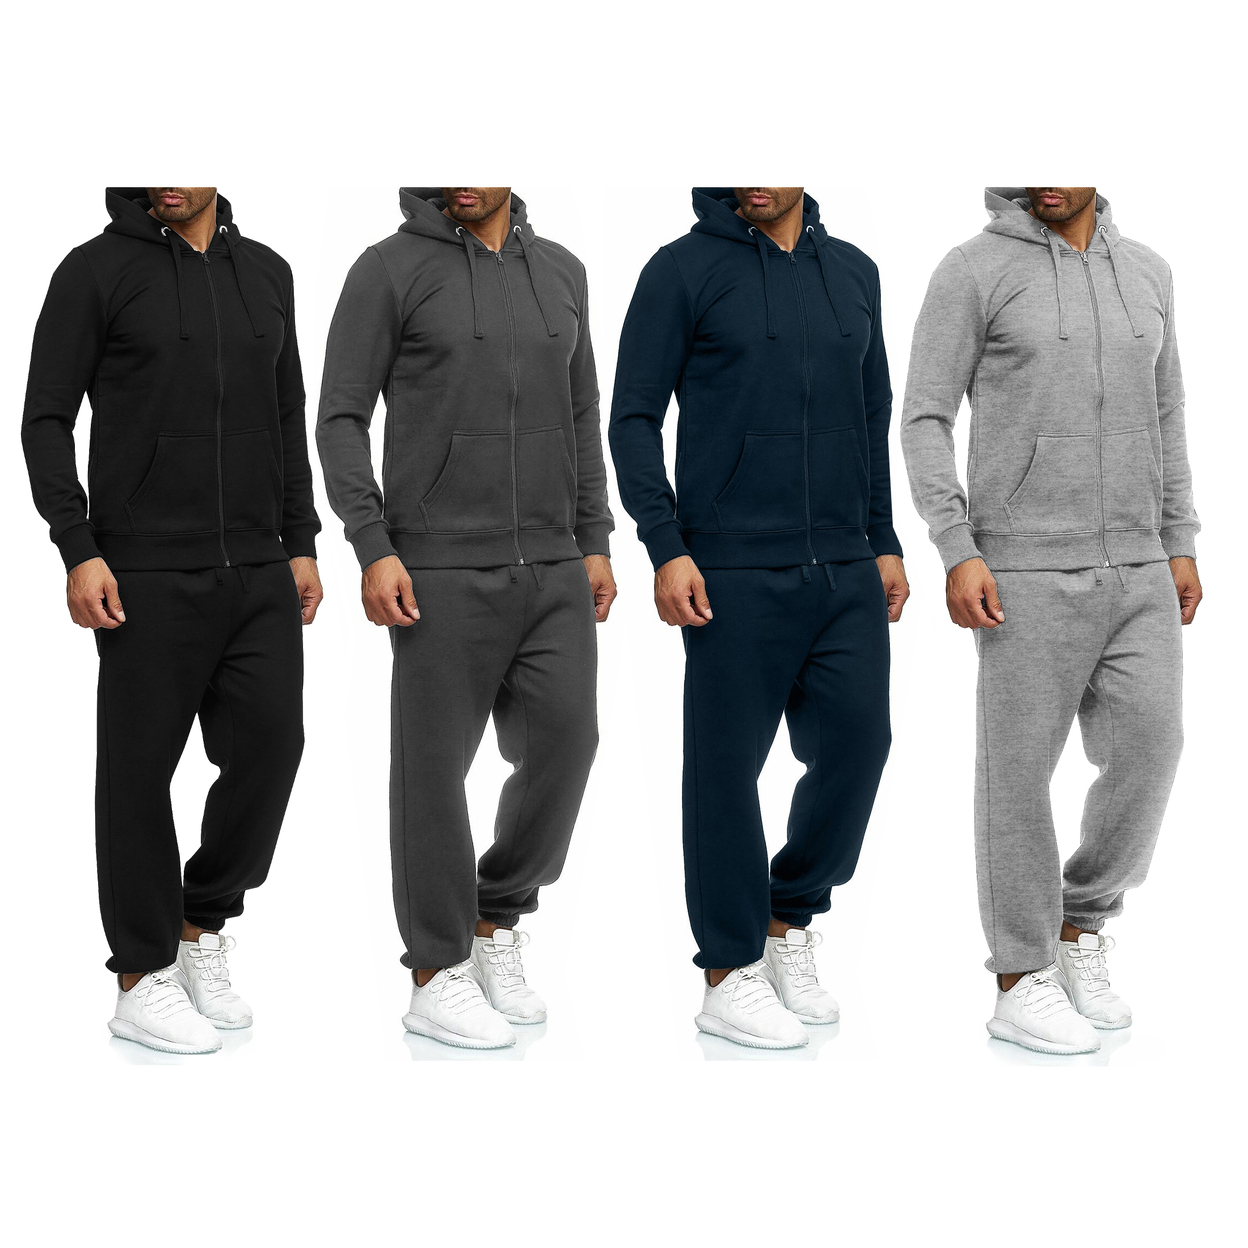 Multi-Pack: Men's Casual Big & Tall Athletic Active Winter Warm Fleece Lined Full Zip Tracksuit Jogger Set - Charcoal, 2-pack, X-large